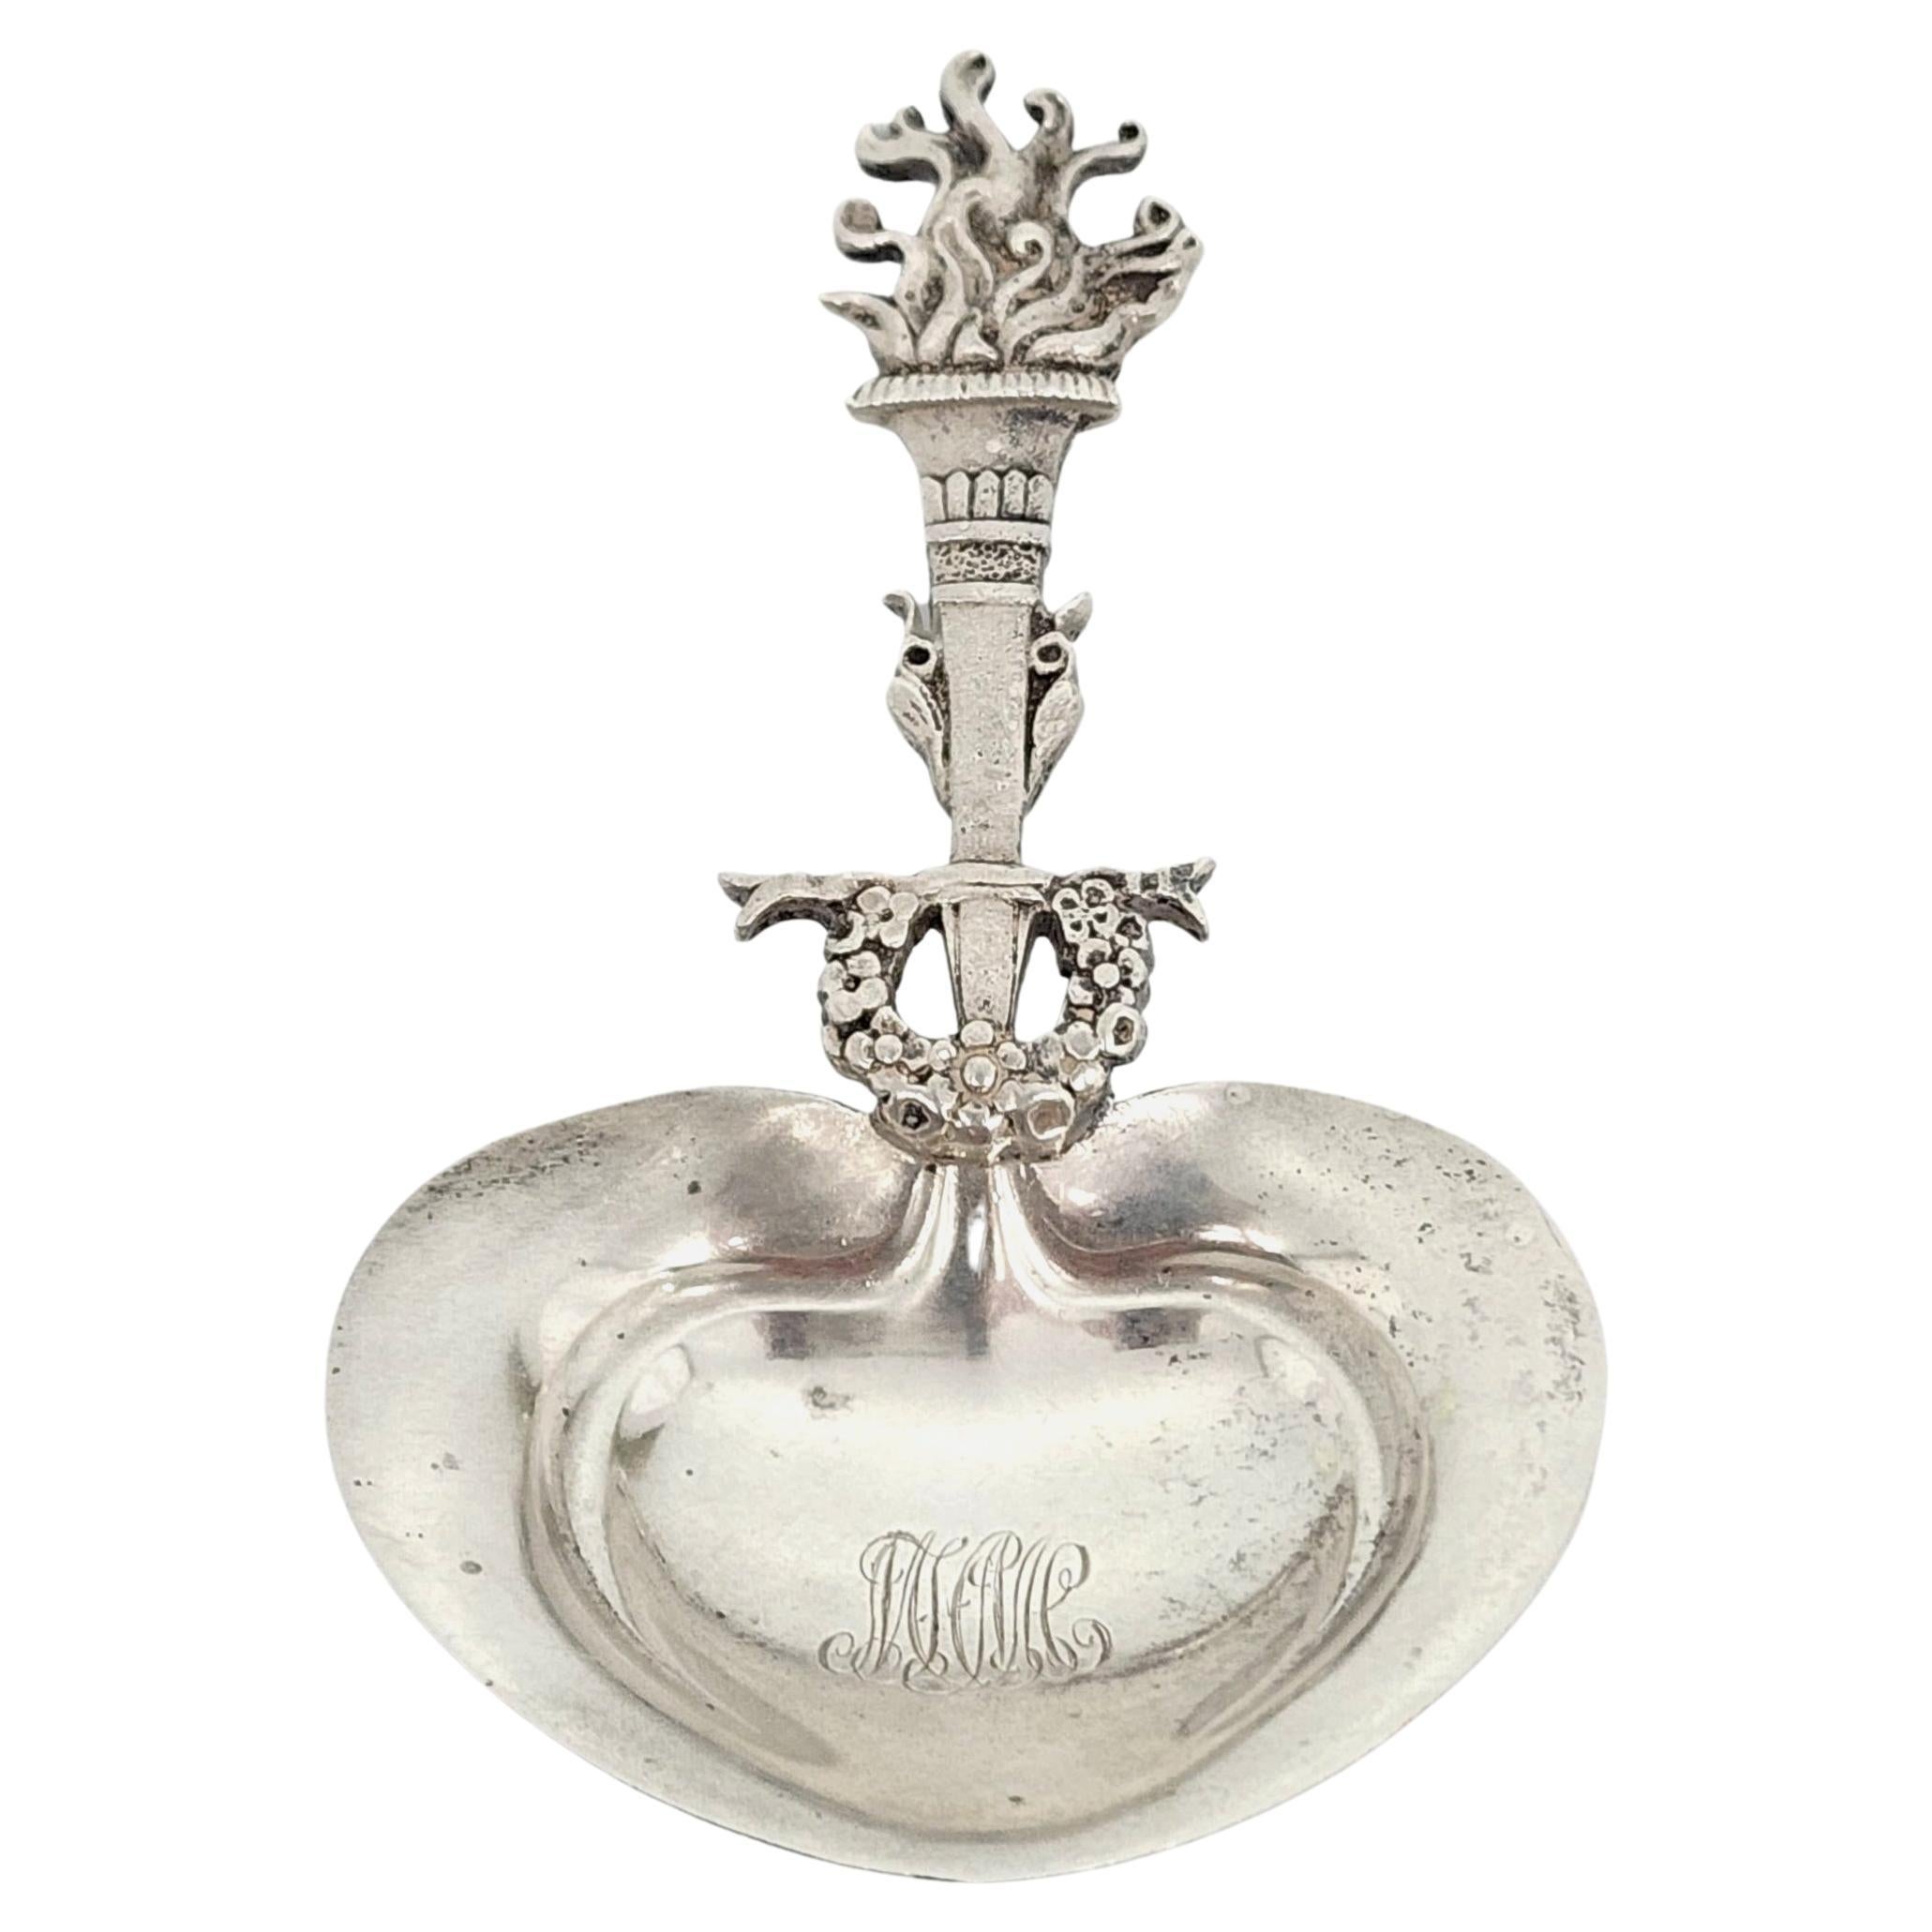 Tiffany & Co Torch and Wreath Sterling Silver Bon Bon Spoon with Monogram For Sale